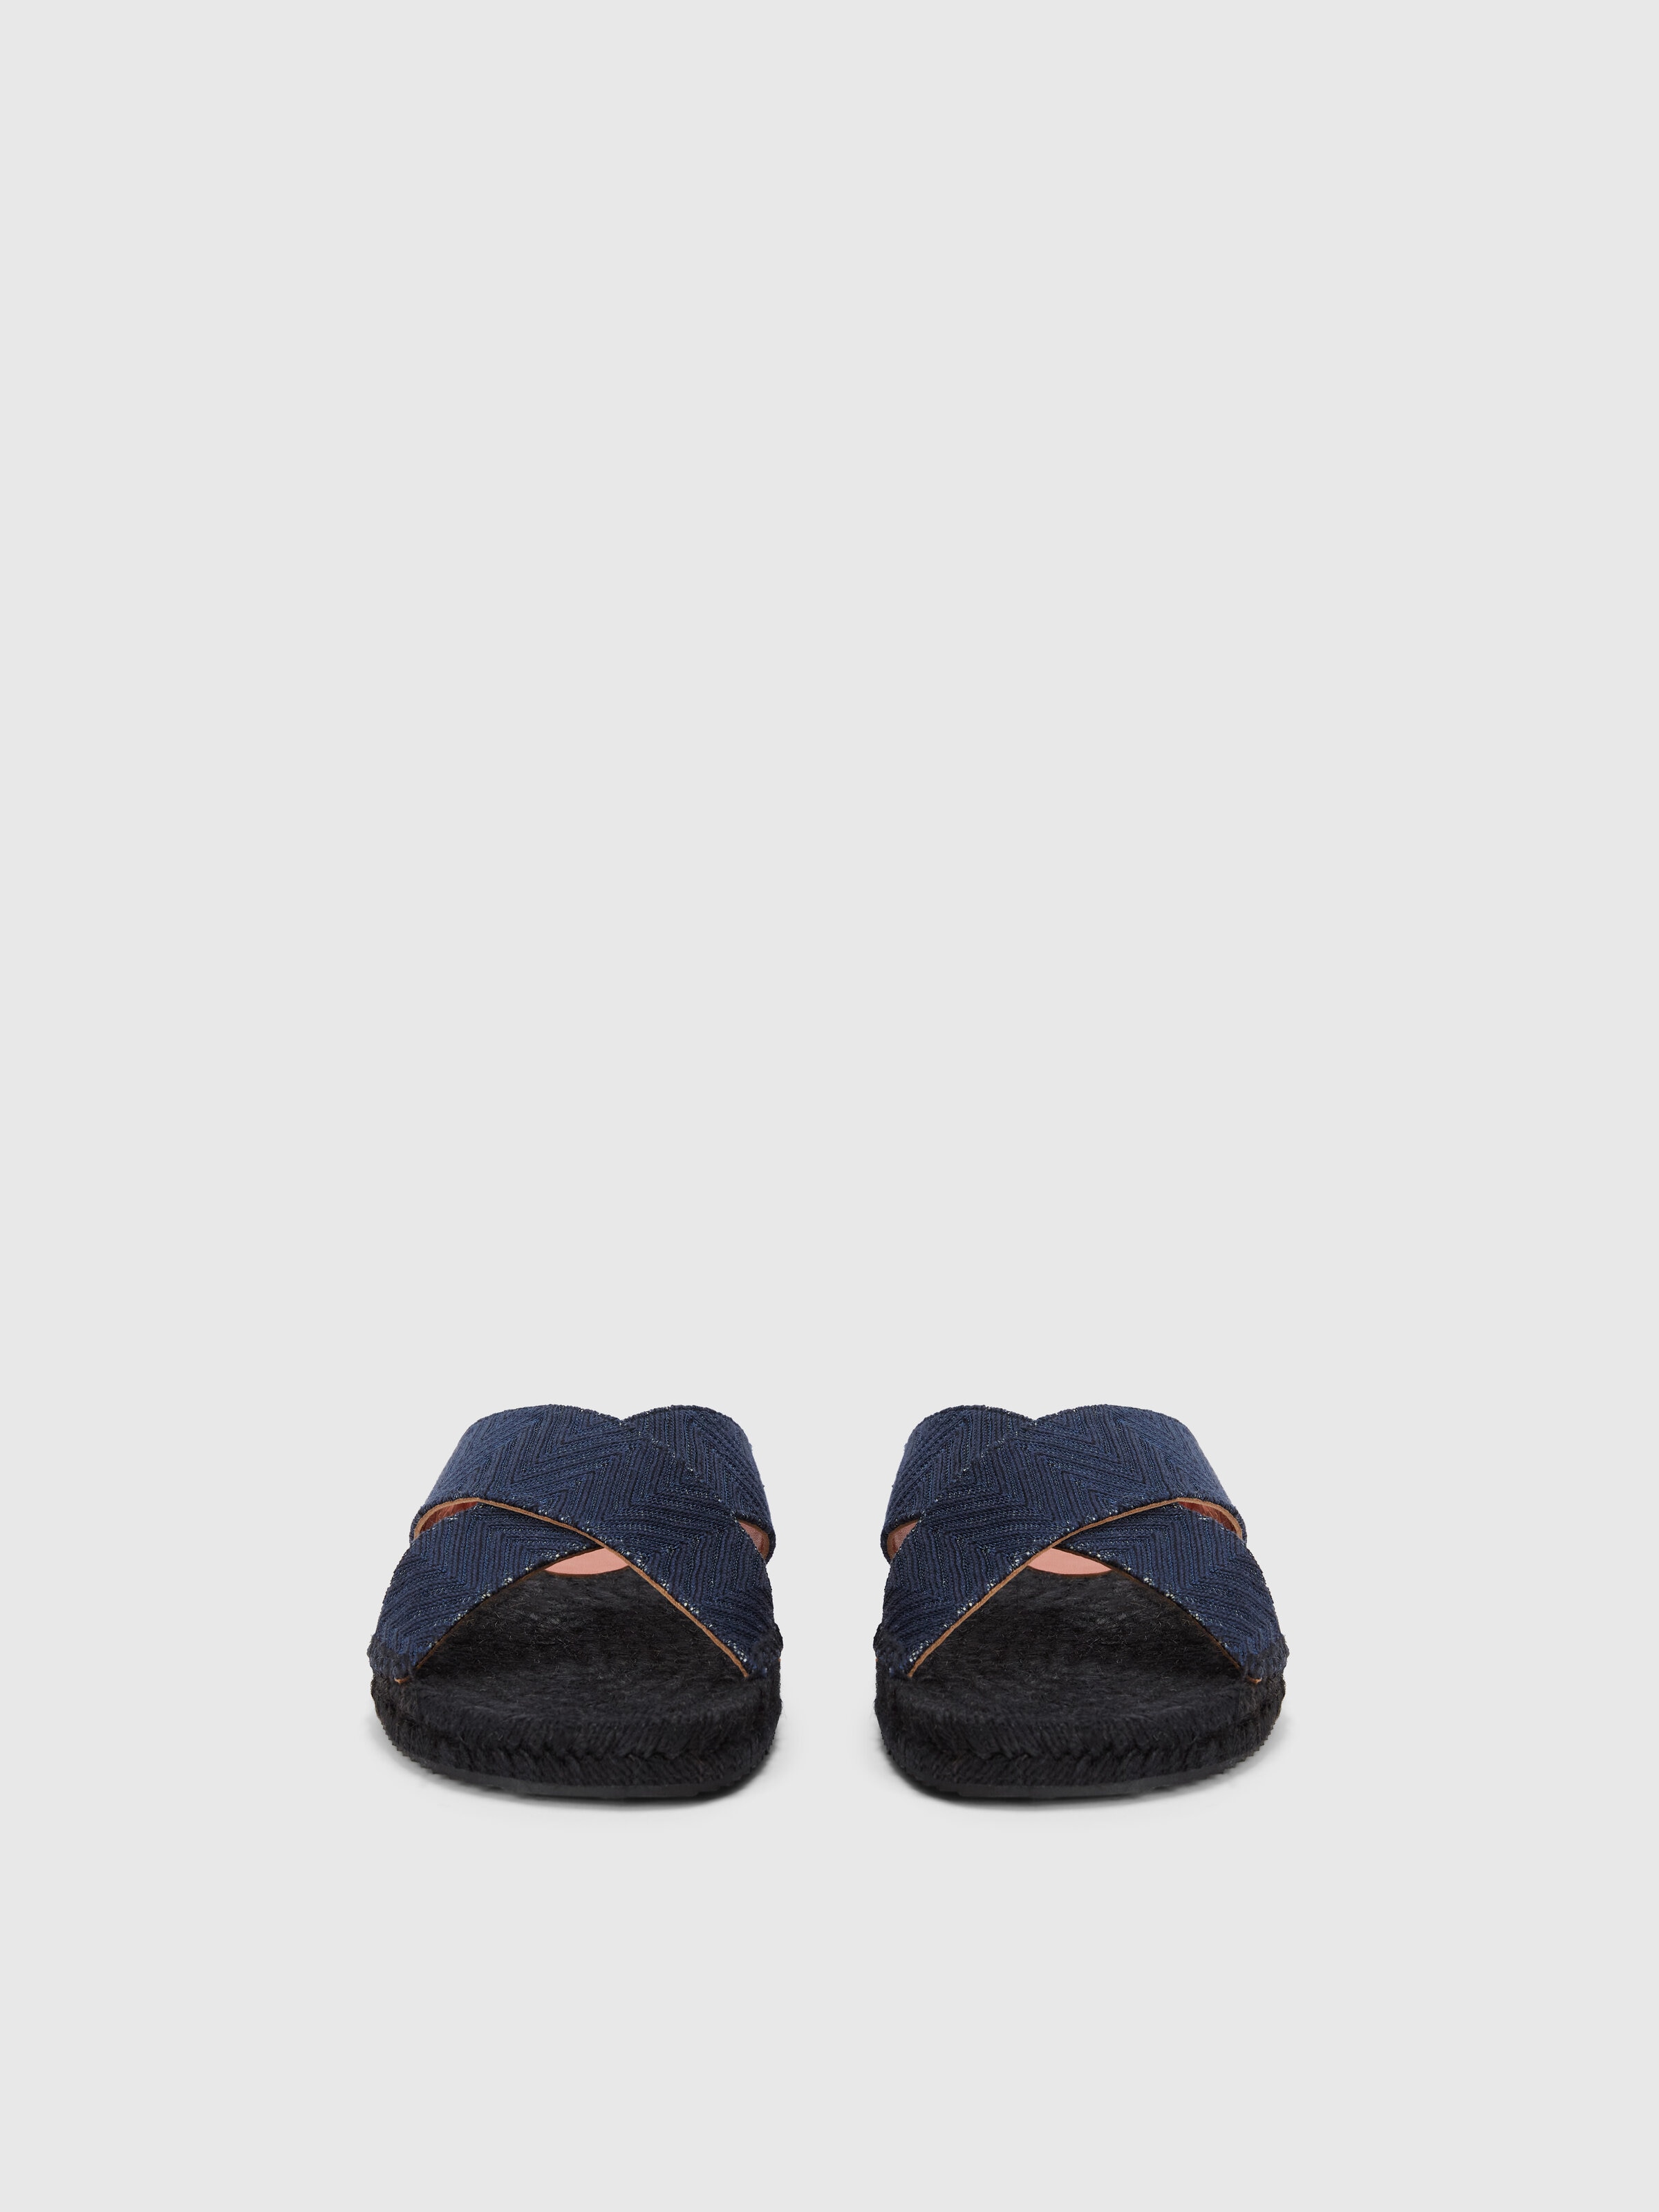 Slippers with double crossed strap and chevron pattern   , Navy Blue  - 2